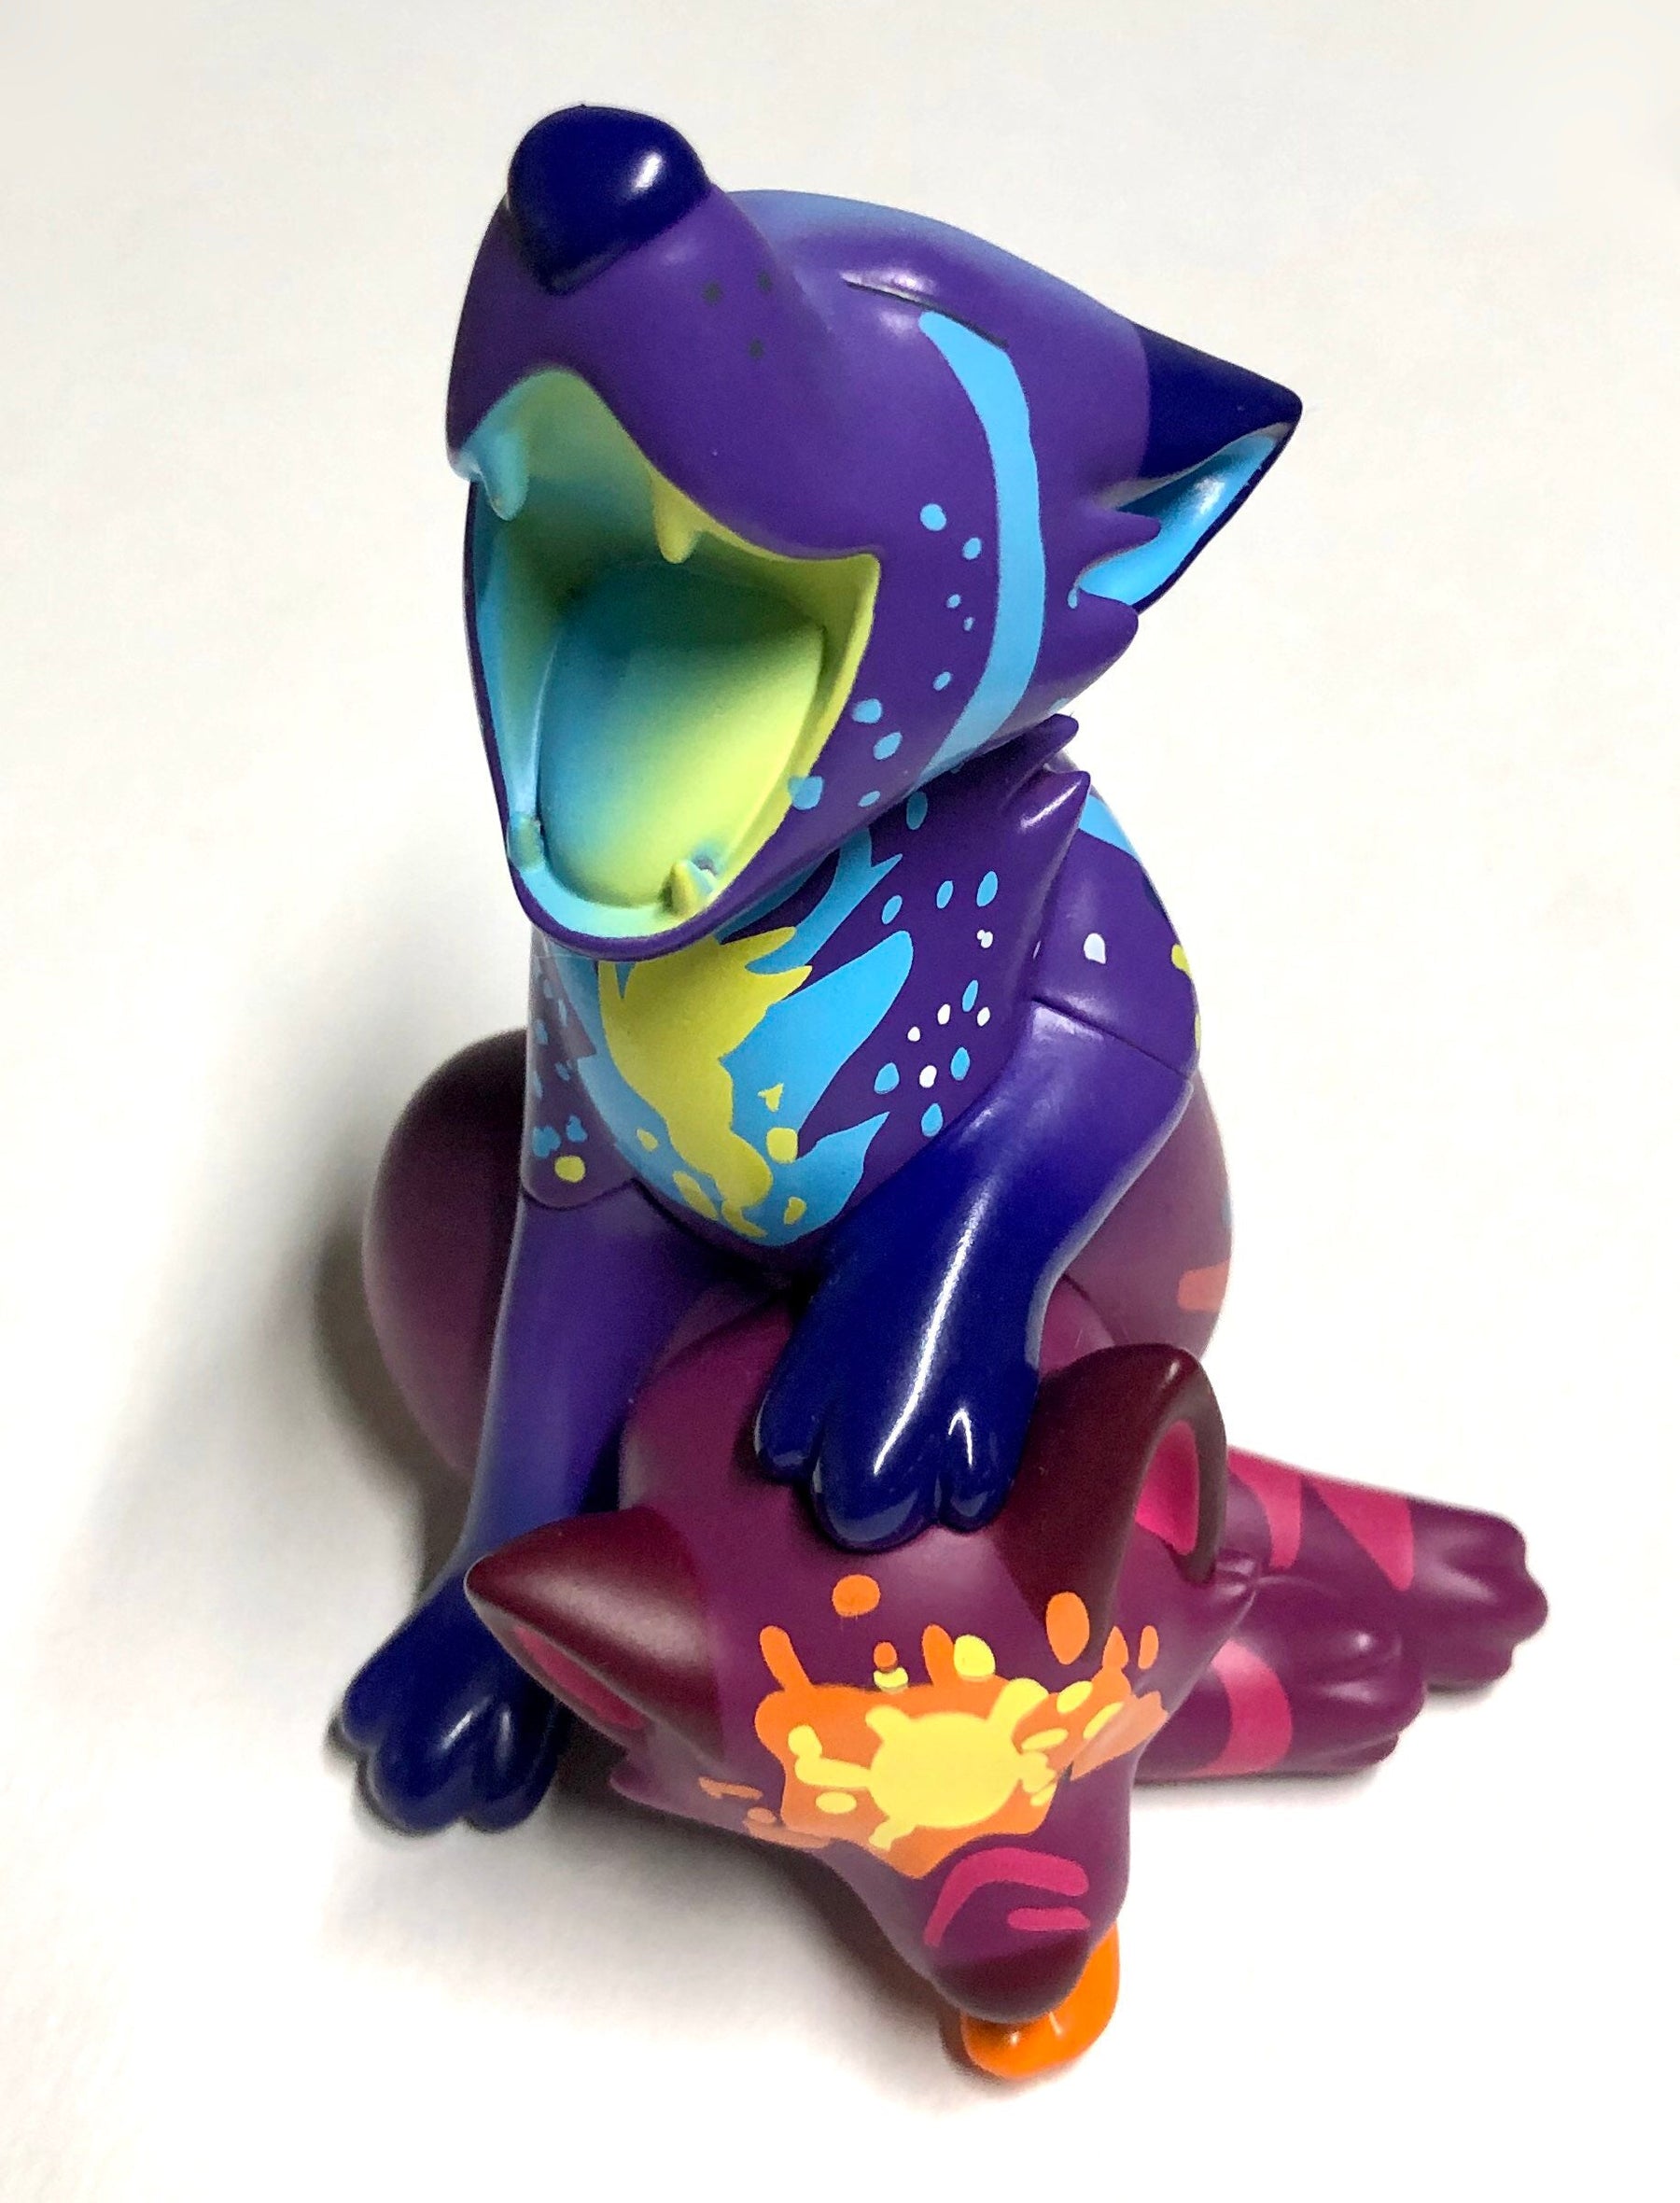 Binimals One Mind 4-inch vinyl figure by TheRoguez Available Now ! ! !